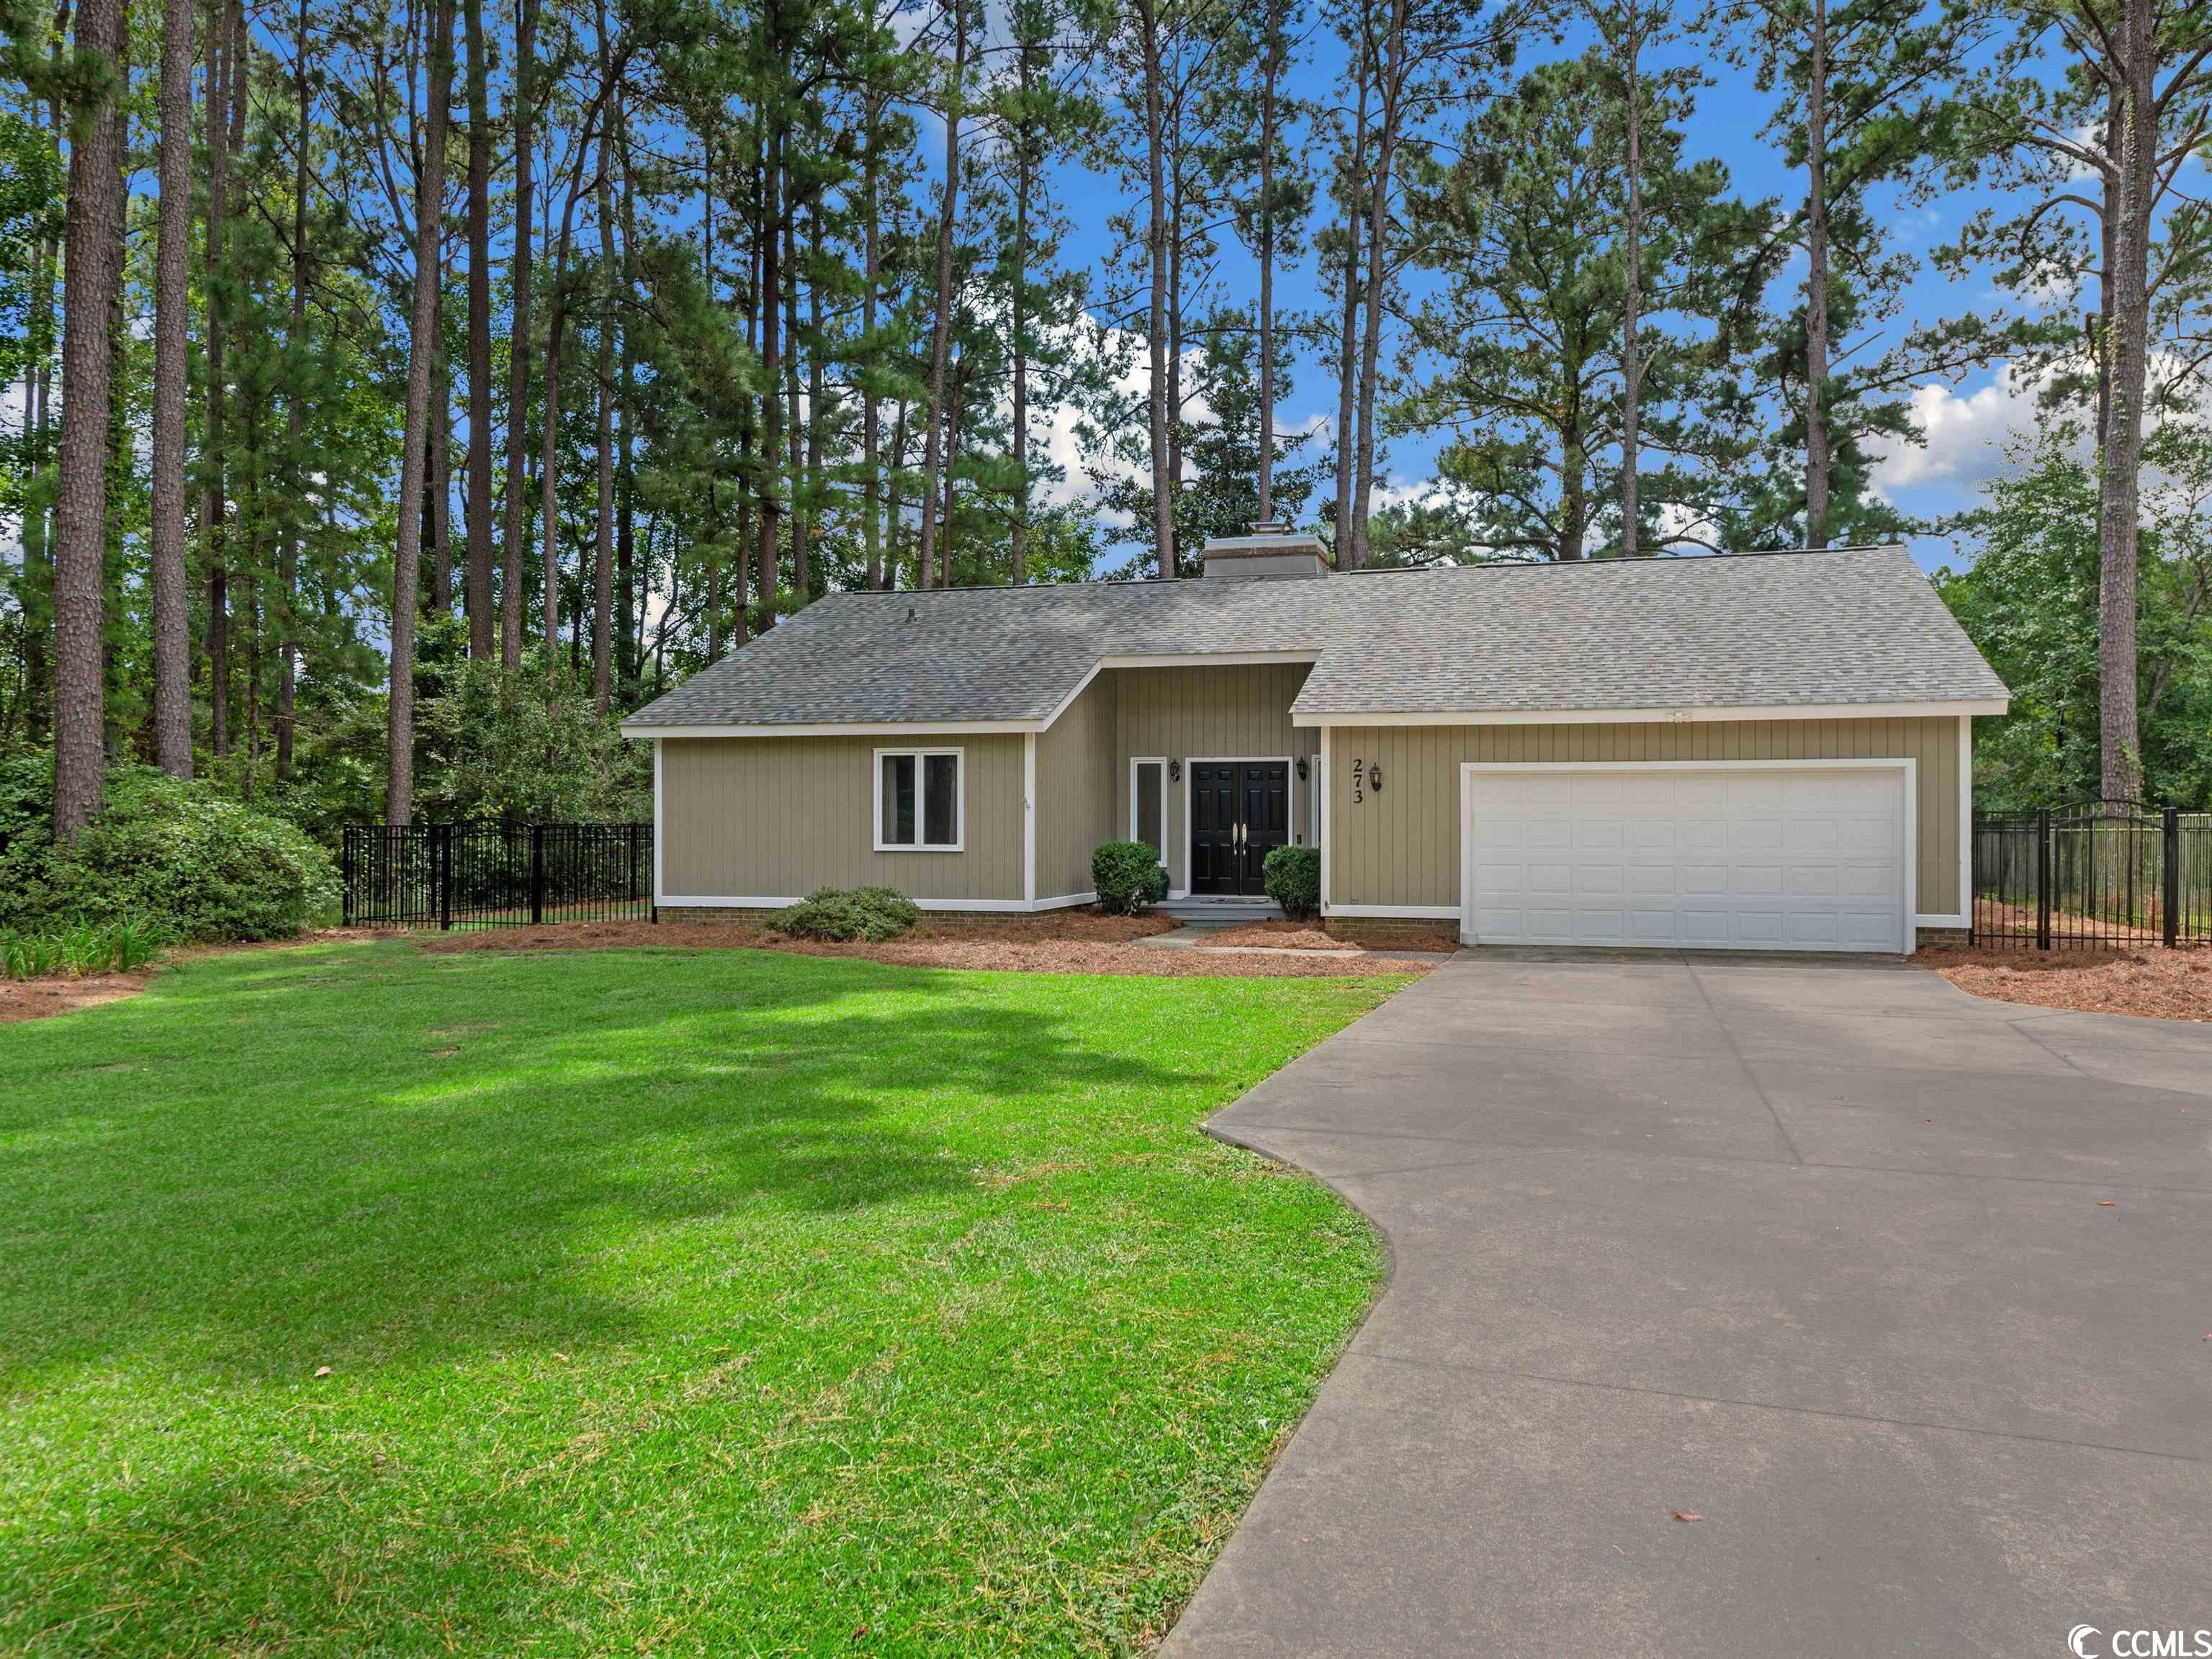 this beautiful 3 bed/2 bath home, renovated in 2019, on .41 acres, with a  fenced in back yard is move in ready! this ranch style home, features a wonderful fireplace in the great room opening up to an enclosed porch that has a door to the patio. the flow from foyer, living room with vaulted ceilings, to the porch, kitchen, dining room and patio is wonderful for entertaining. the split bedroom plan features the spacious master suite with linen closet. the additional two bedrooms share a bath that opens to the hall for easy access. the spacious 2 car garage is equipped with pegboard to hang all yard items, etc.  roof 2019, hvac 8/2022, 2019 all new flooring, lighting, vanities, complete painting inside and out, your routine maintenance will be minimal.  wedgefield plantation is located in a lovely southern setting with gorgeous live oaks, has its own private boat ramp and landing leading into the black river and on to the intercoastal waterway, a beautiful golf course with new pub for dining and optional pool membership. downtown georgetown is less than 10 minutes away where you will enjoy dining, shopping, museums, art galleries and the harbor walk. the beautiful beaches of pawleys island are just a 20 minute ride north. charleston and myrtle beach are approximately an hour drive away. this move in ready, fenced in yard home in wedgefield plantation is the perfect place to call home!